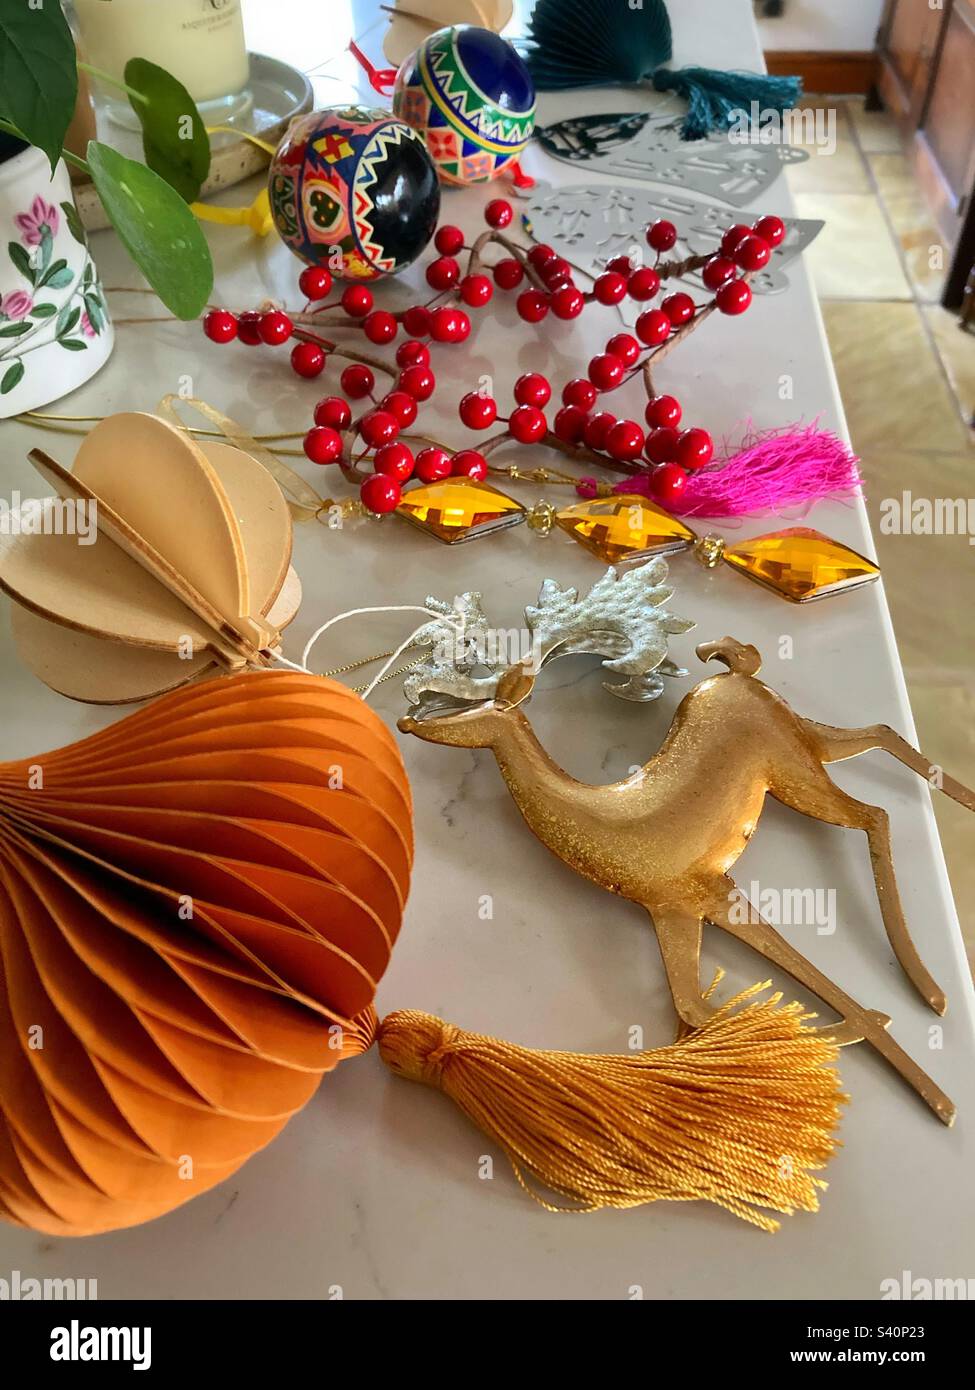 Christmas decorations laid out on a kitchen worktop ready to be put away or hung up Stock Photo